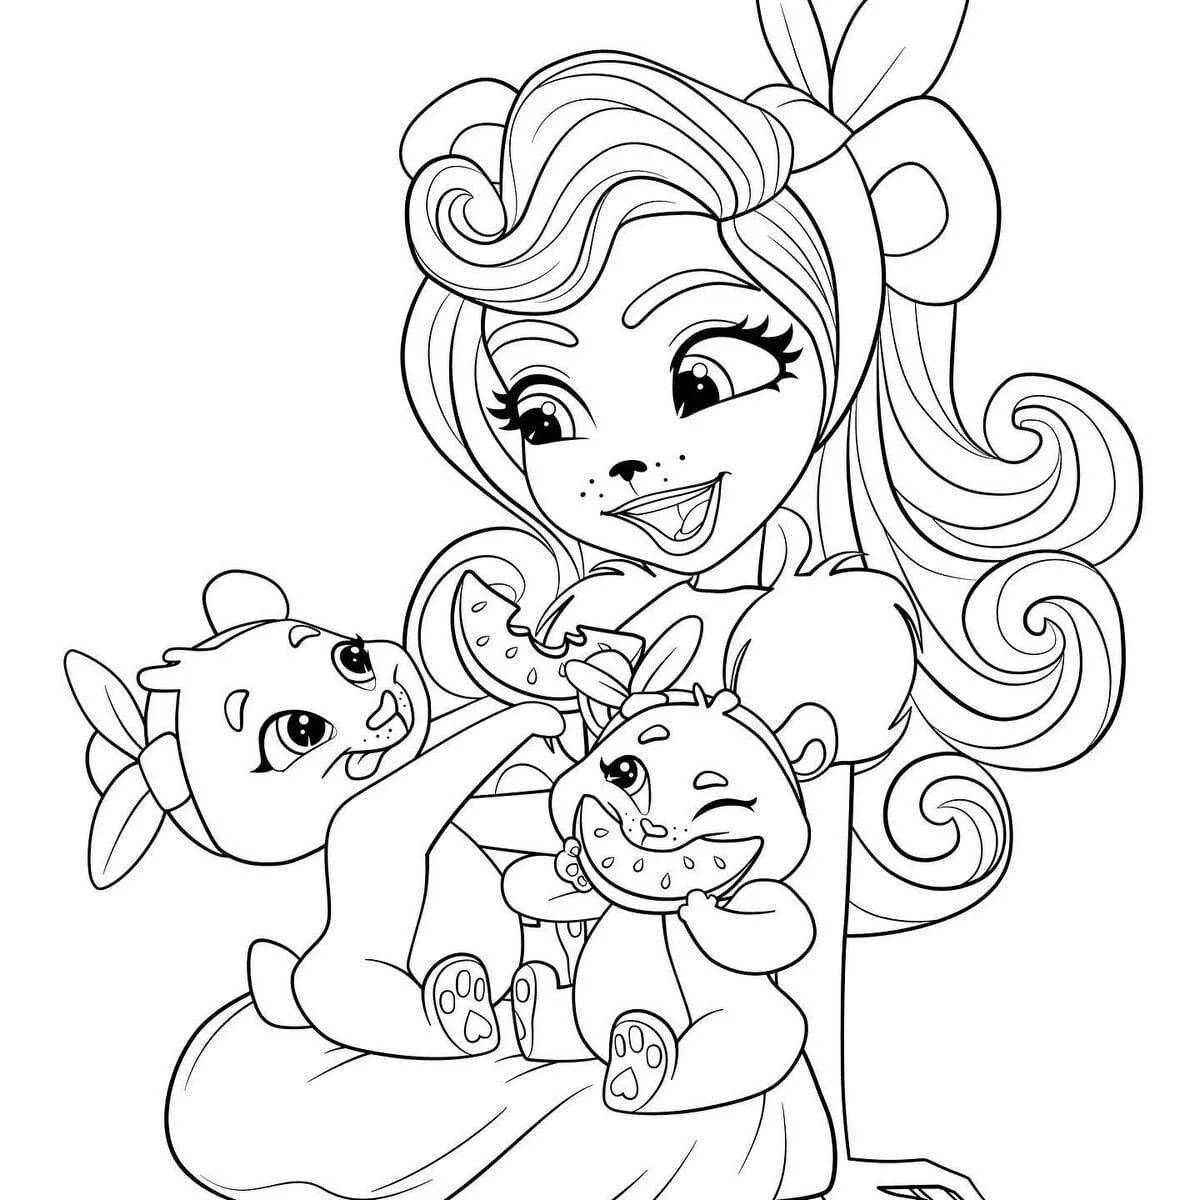 Amazing enchantimals coloring pages